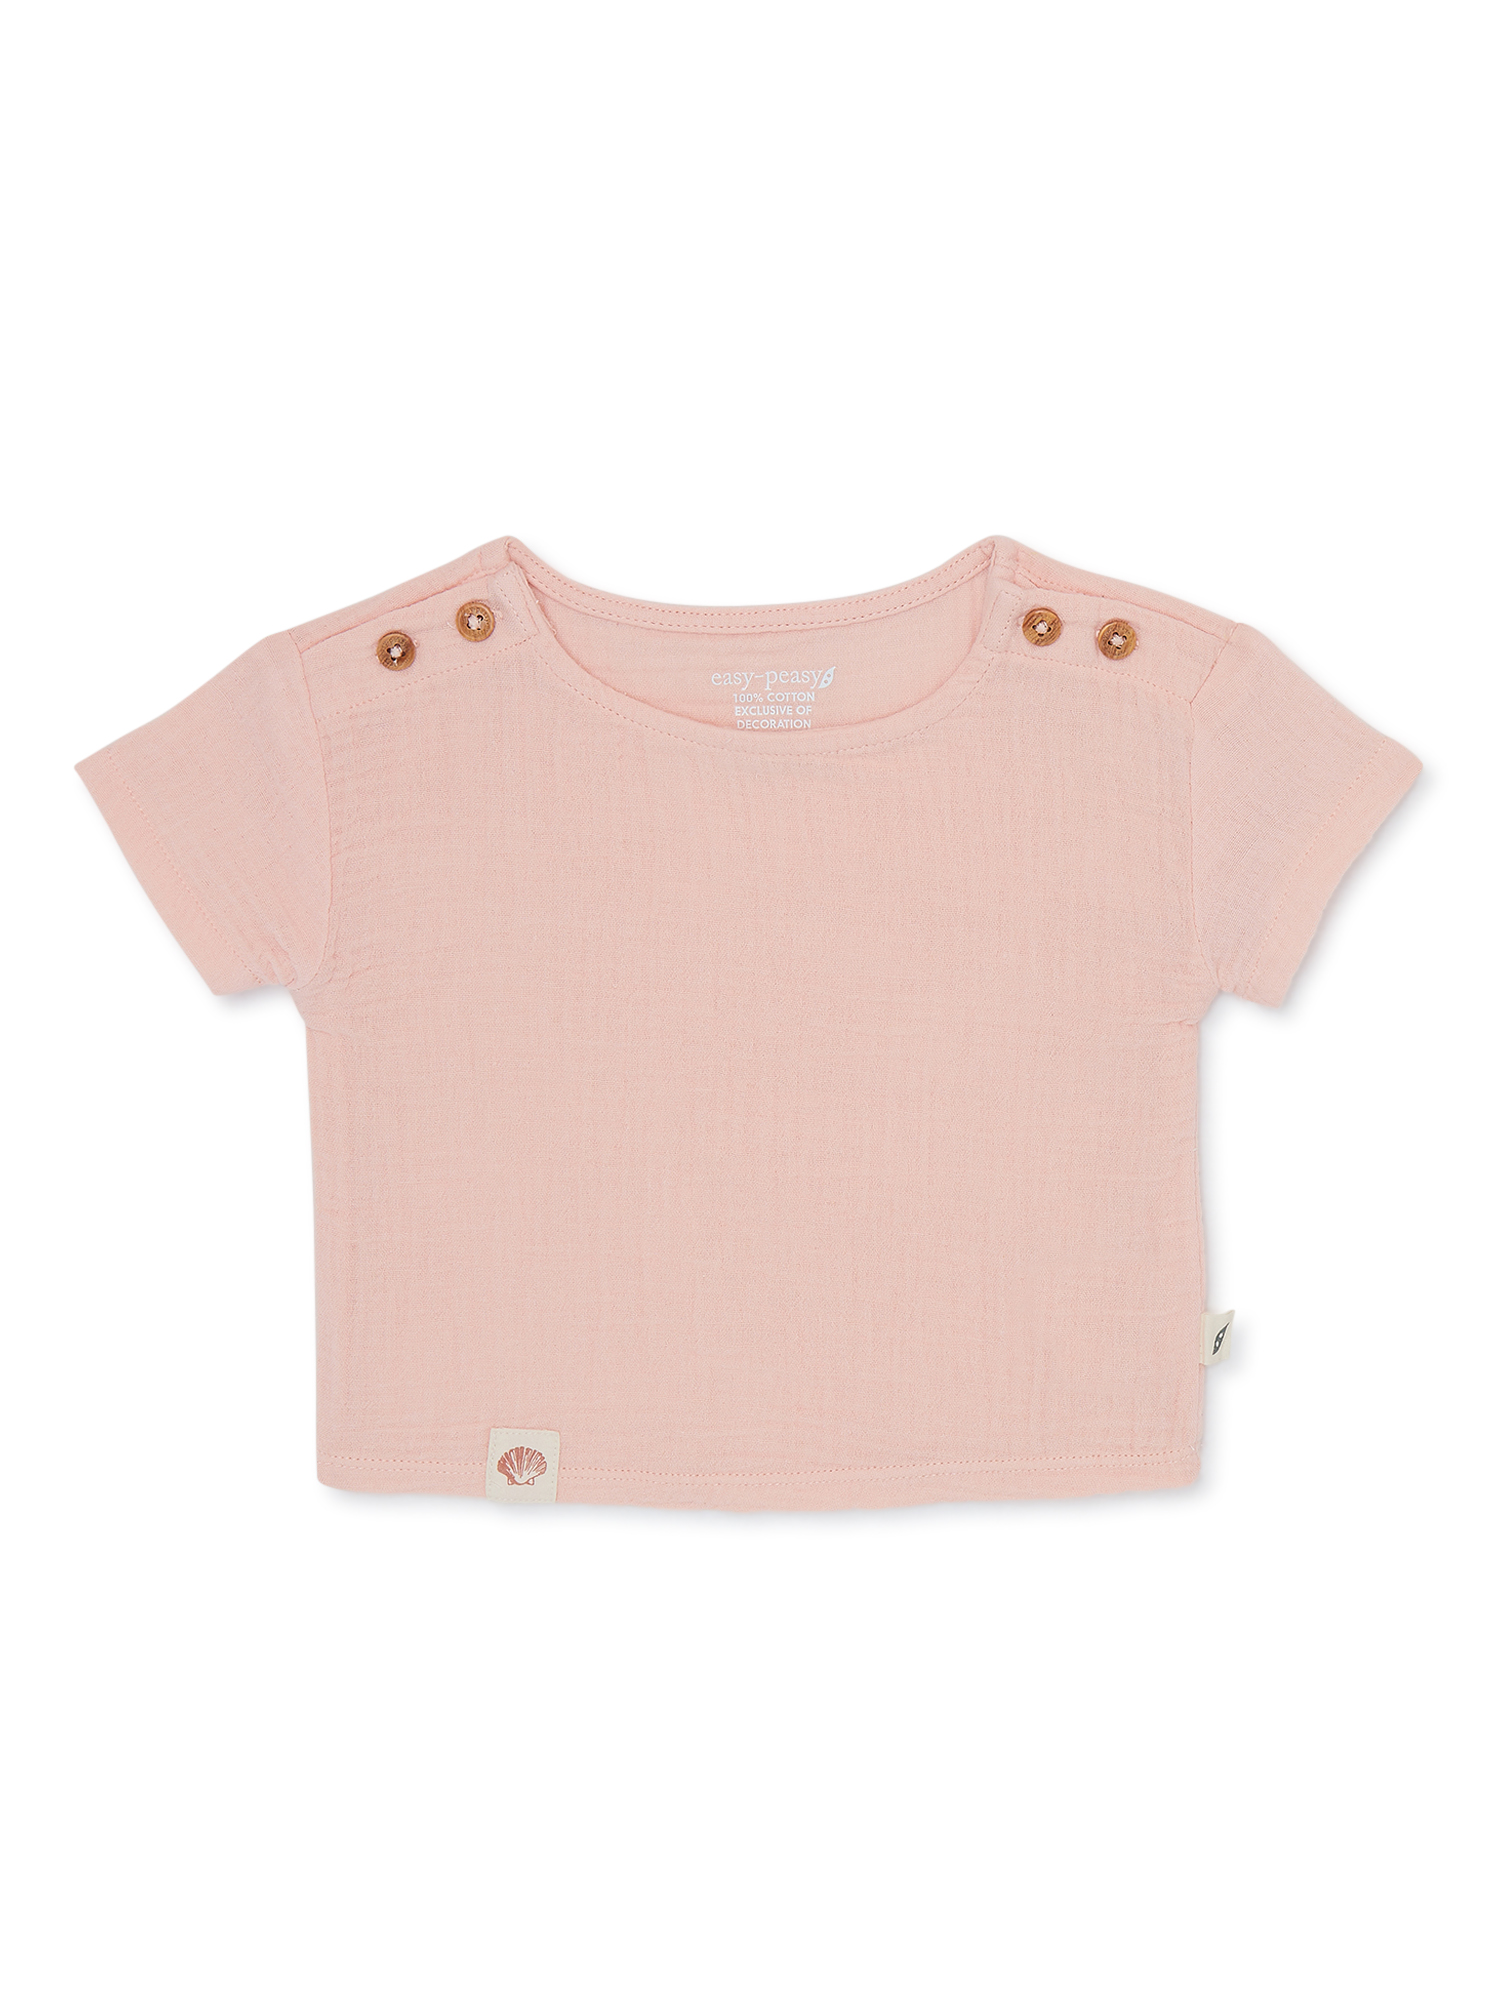 easy-peasy Baby Short Sleeve Solid Woven Tee, Sizes 0-24 Months - image 1 of 4